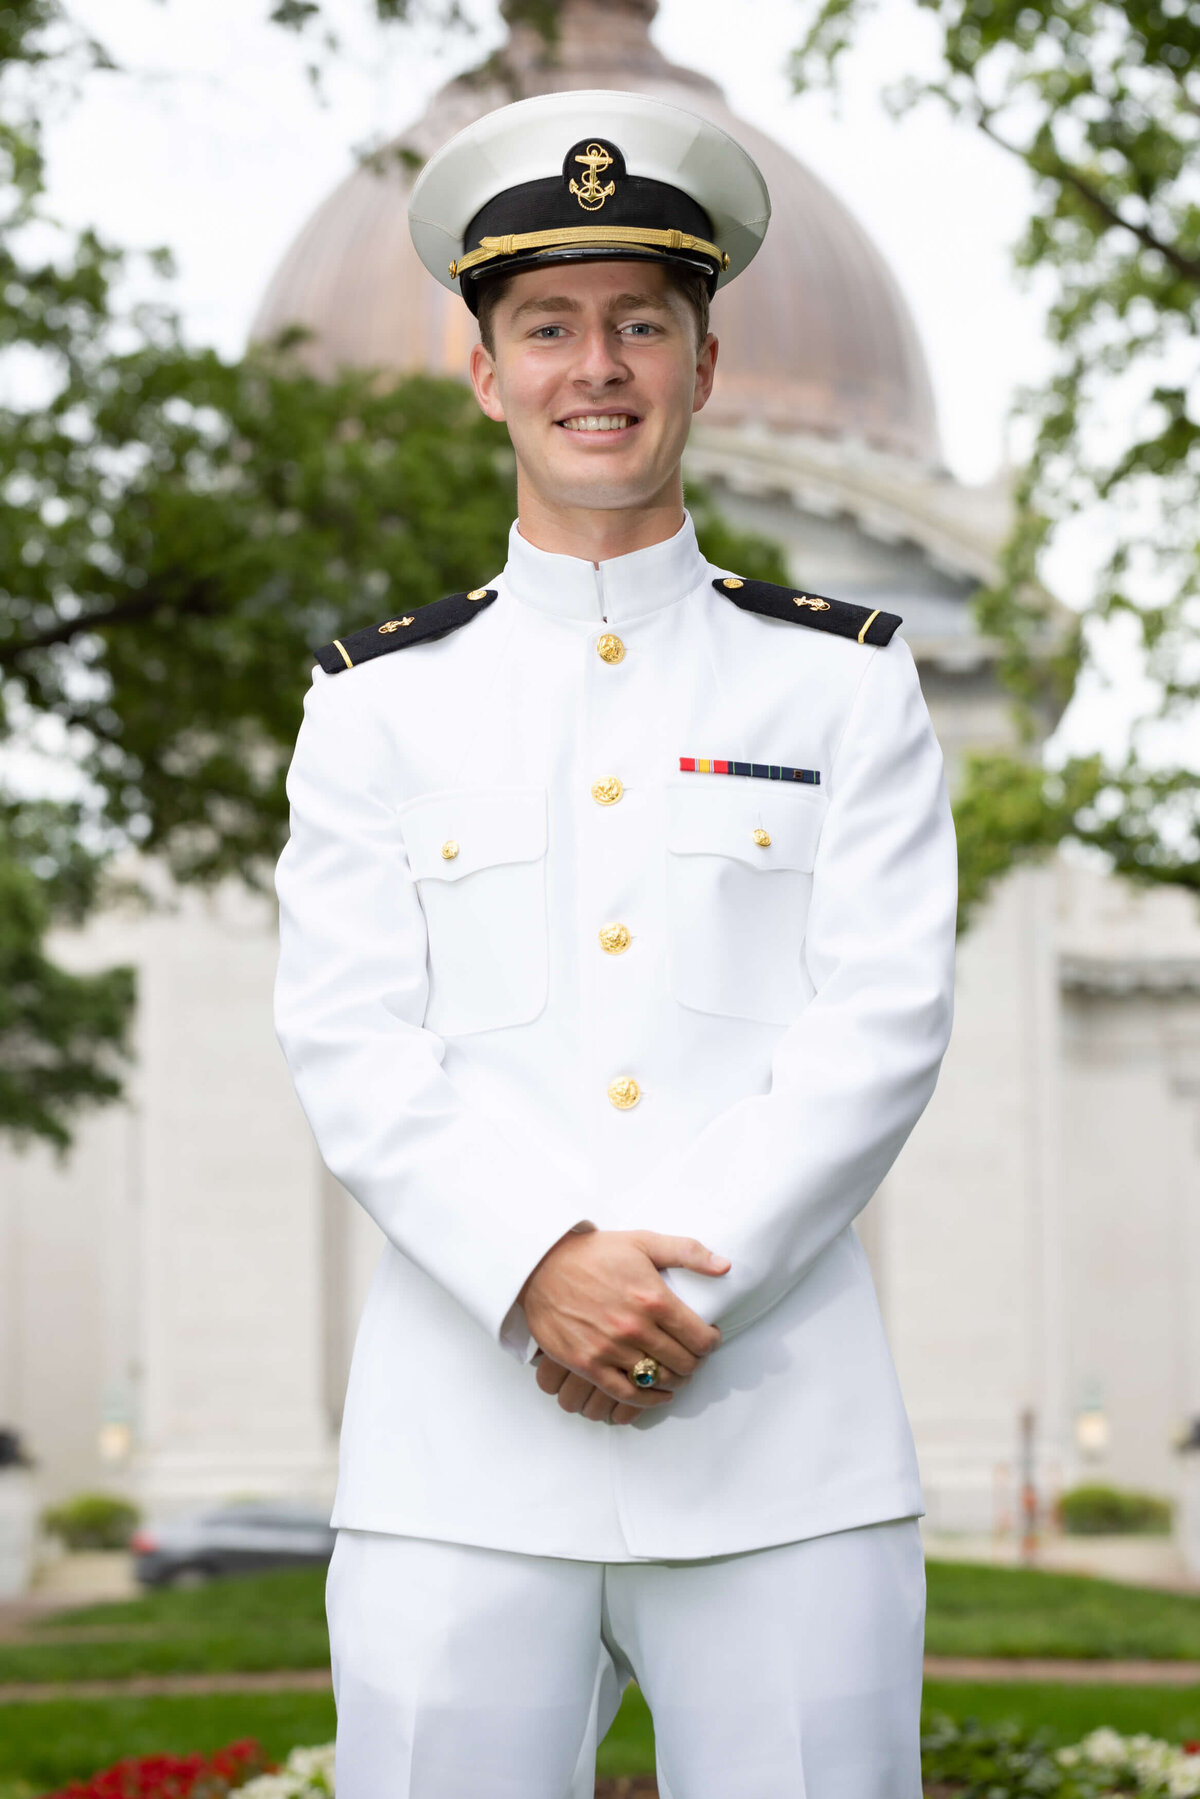 Senior portrait in white navy uniform in front of the Naval Academy Chapel dome.